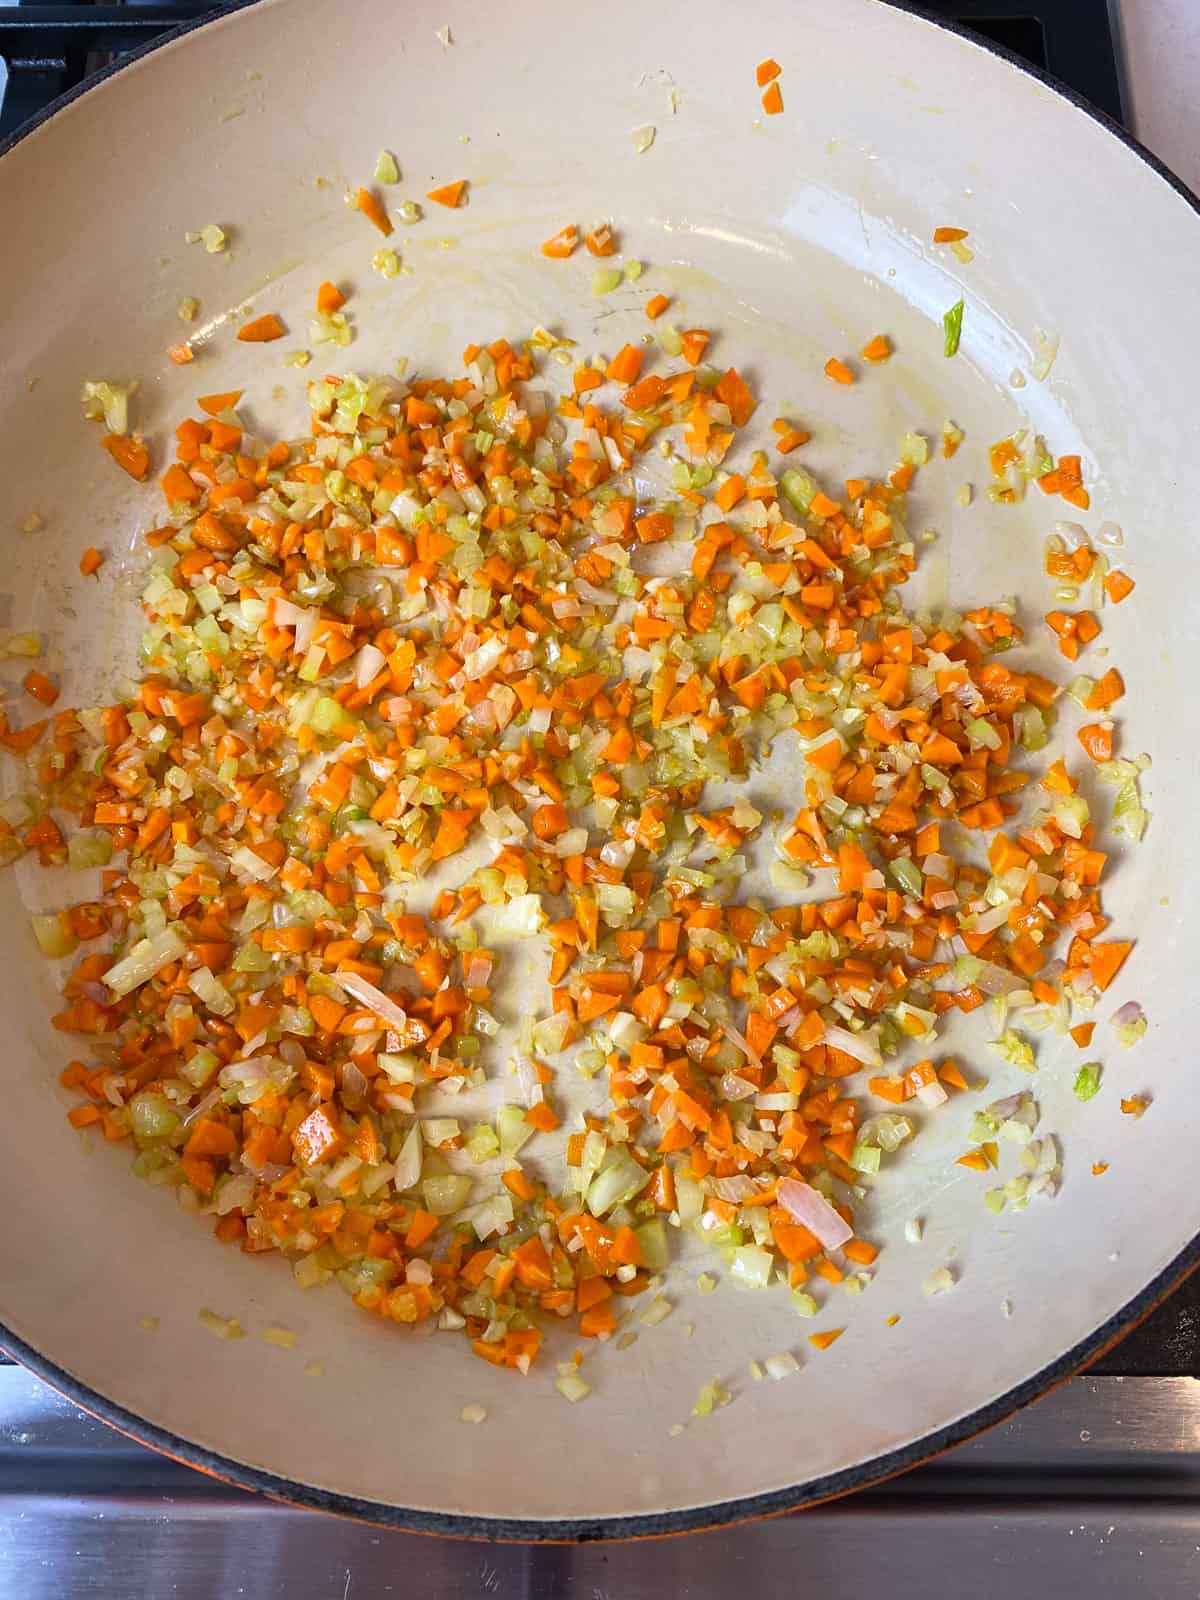 Saute chopped carrot, celery and shallot in olive oil until softened.